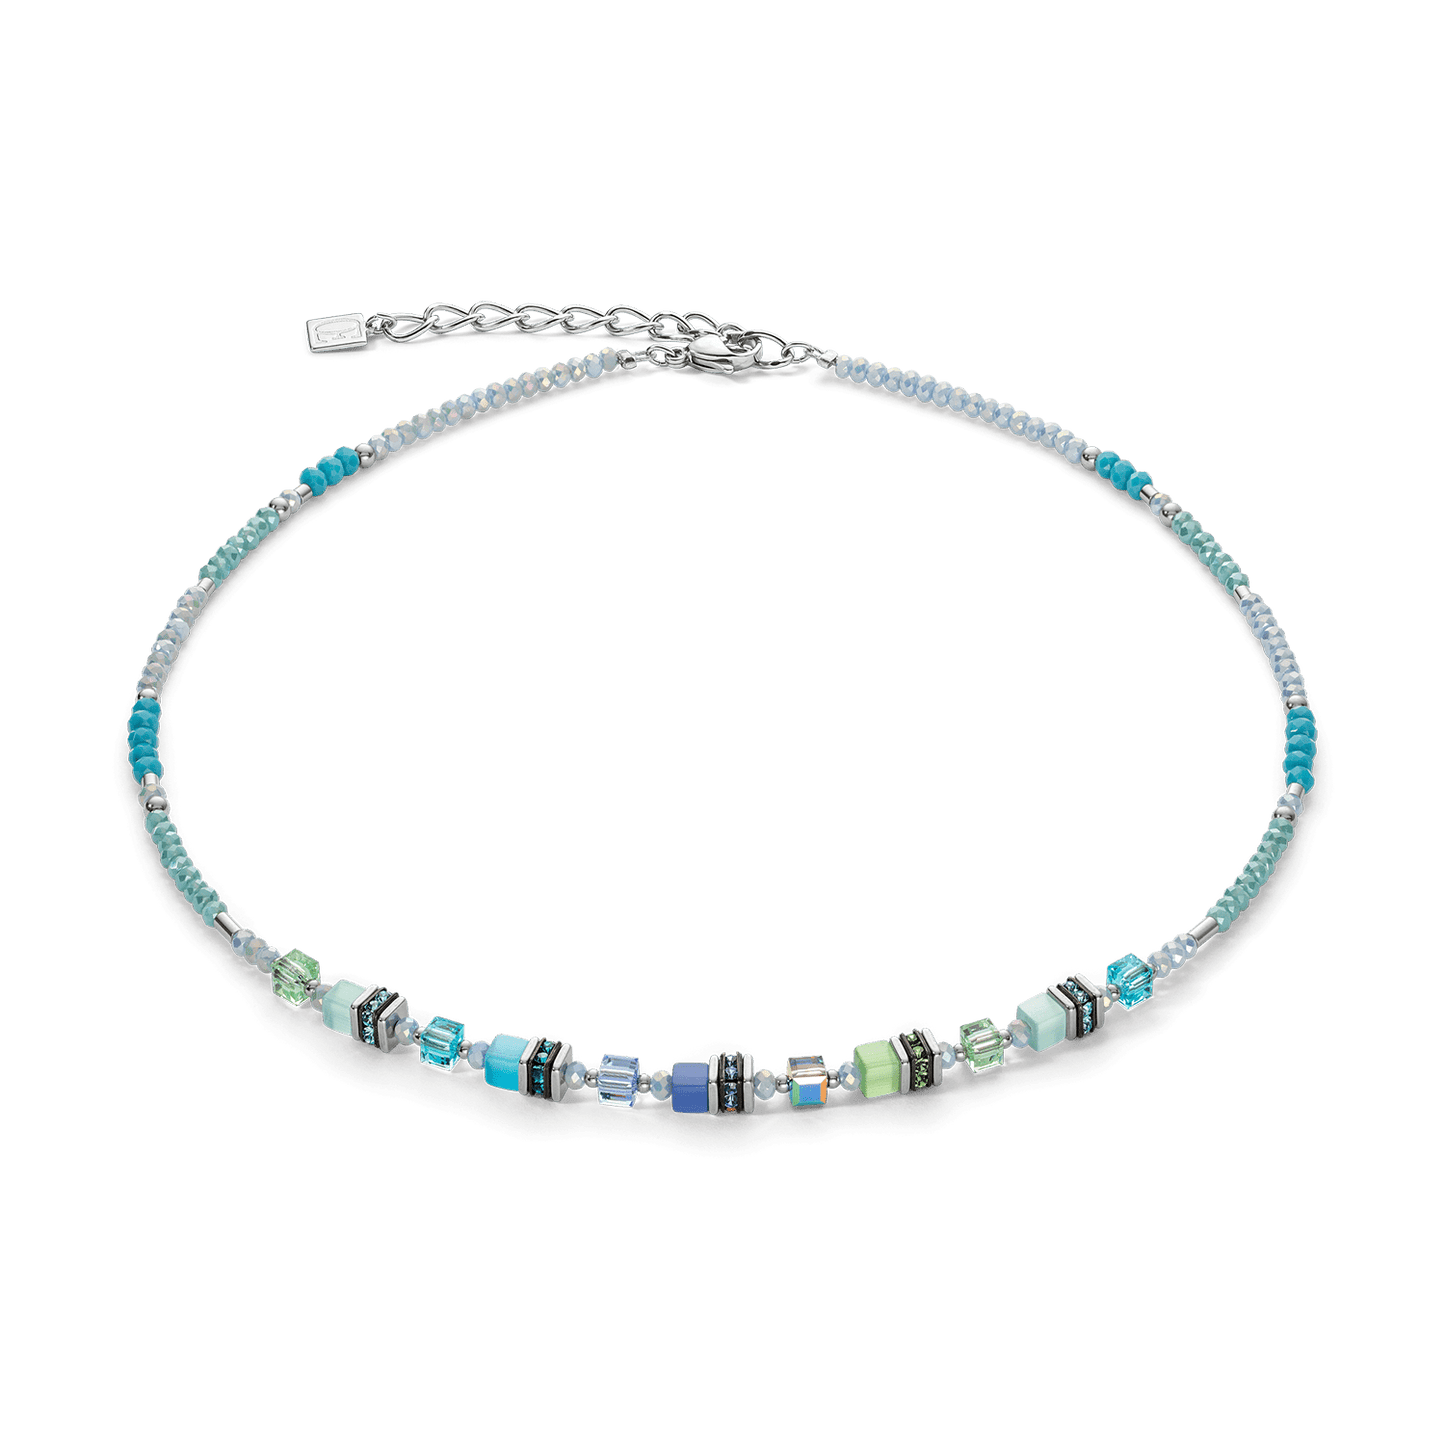 NKL Blue-Green Sparkling Cube Story Necklace